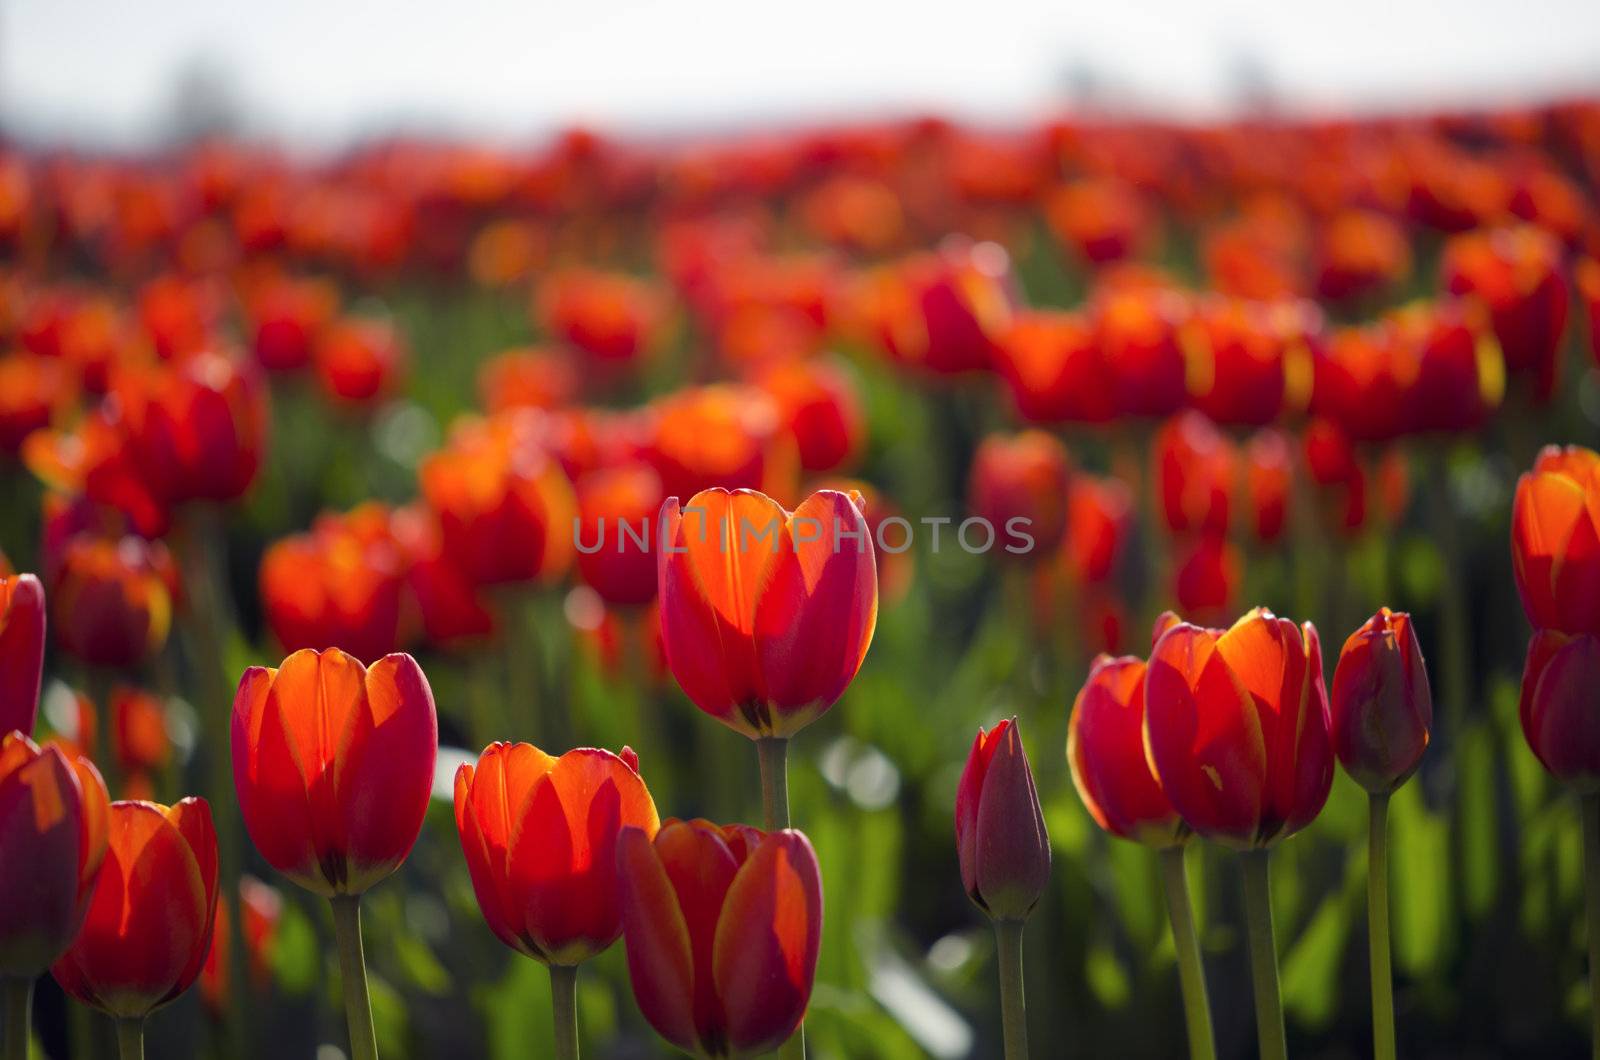 field of red tulips in full bloom - spring